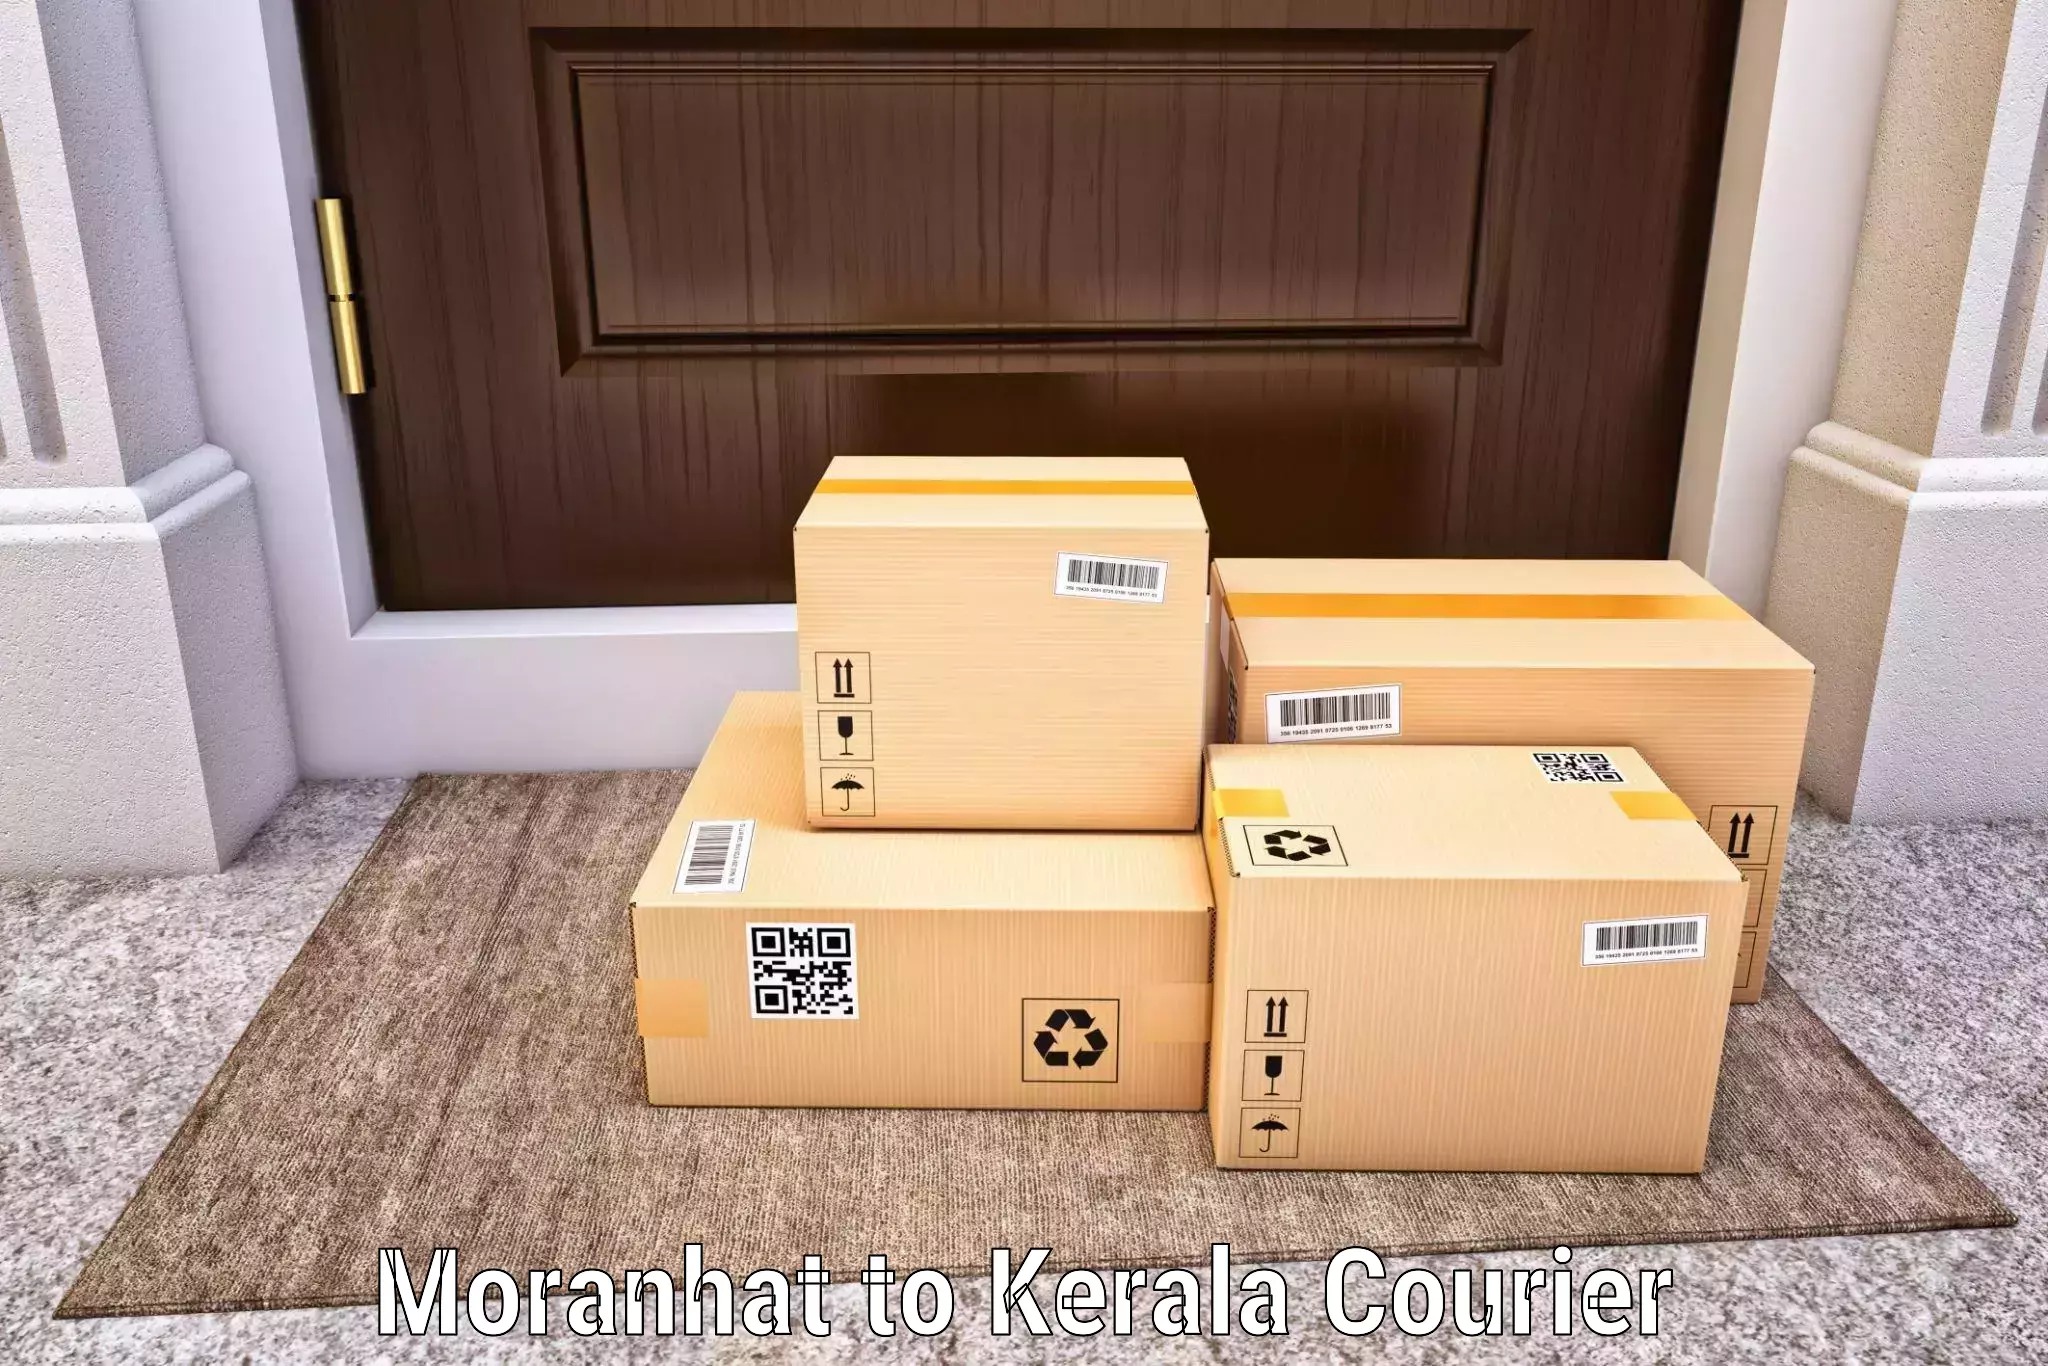 Full-service courier options Moranhat to Kerala